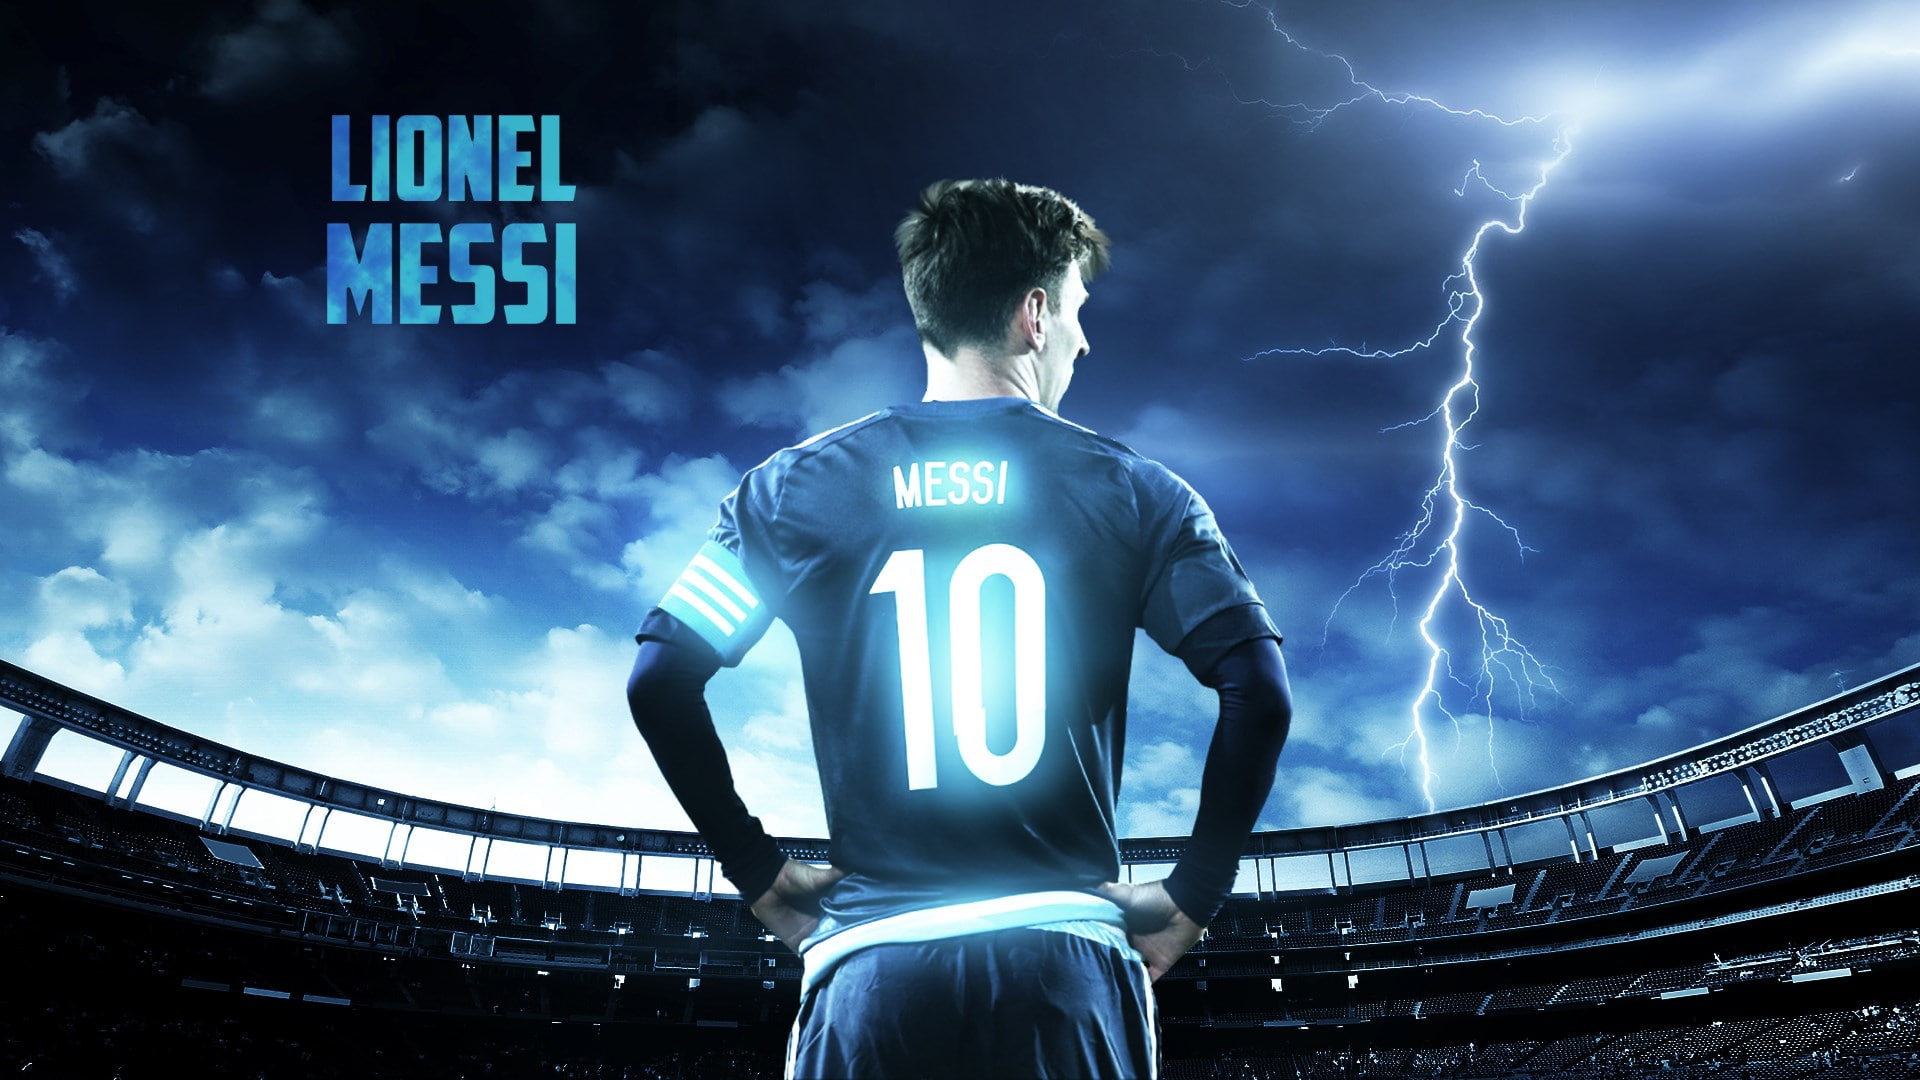 messi best, sky, cloud - sky, one person, standing, sport, athlete